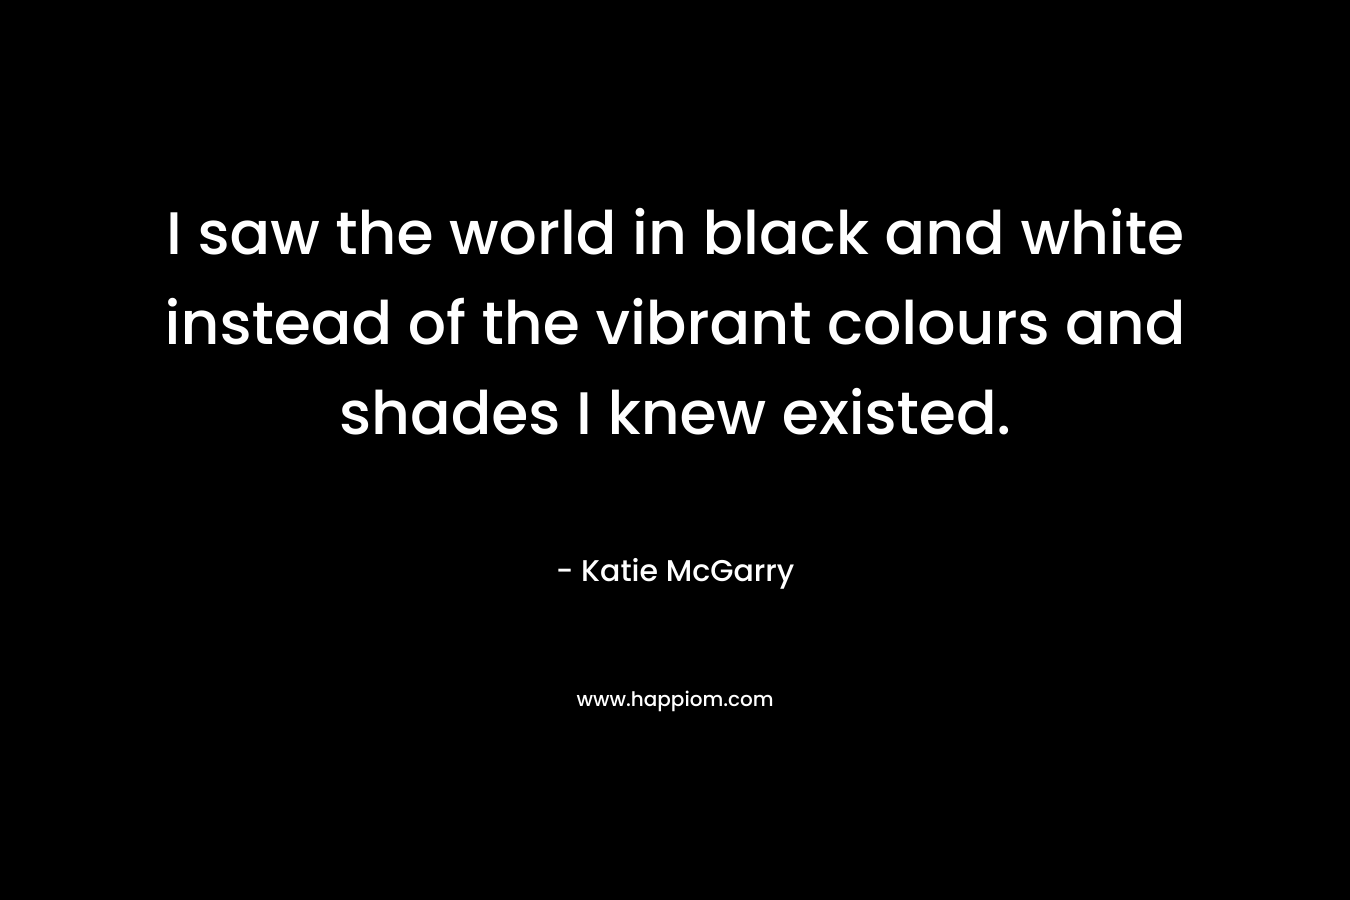 I saw the world in black and white instead of the vibrant colours and shades I knew existed. – Katie McGarry